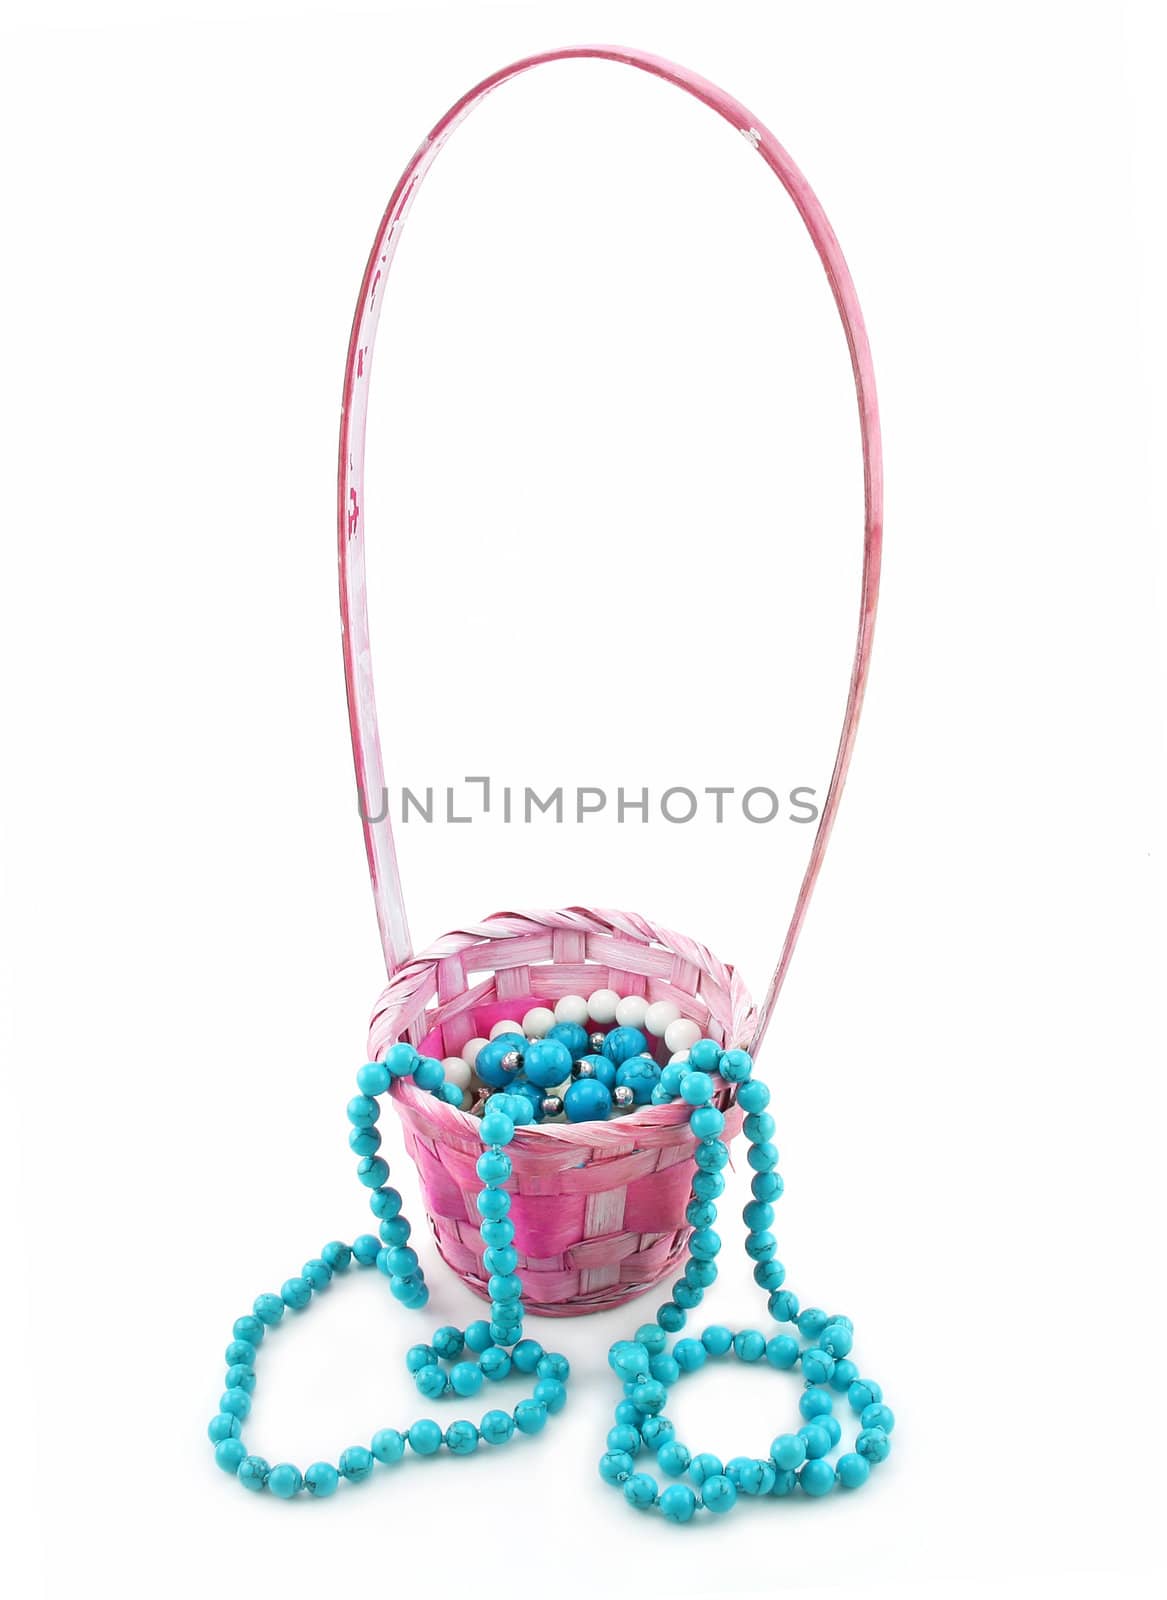 Colored Pearl Beads in Pink Wicker Basket Isolated by alphacell